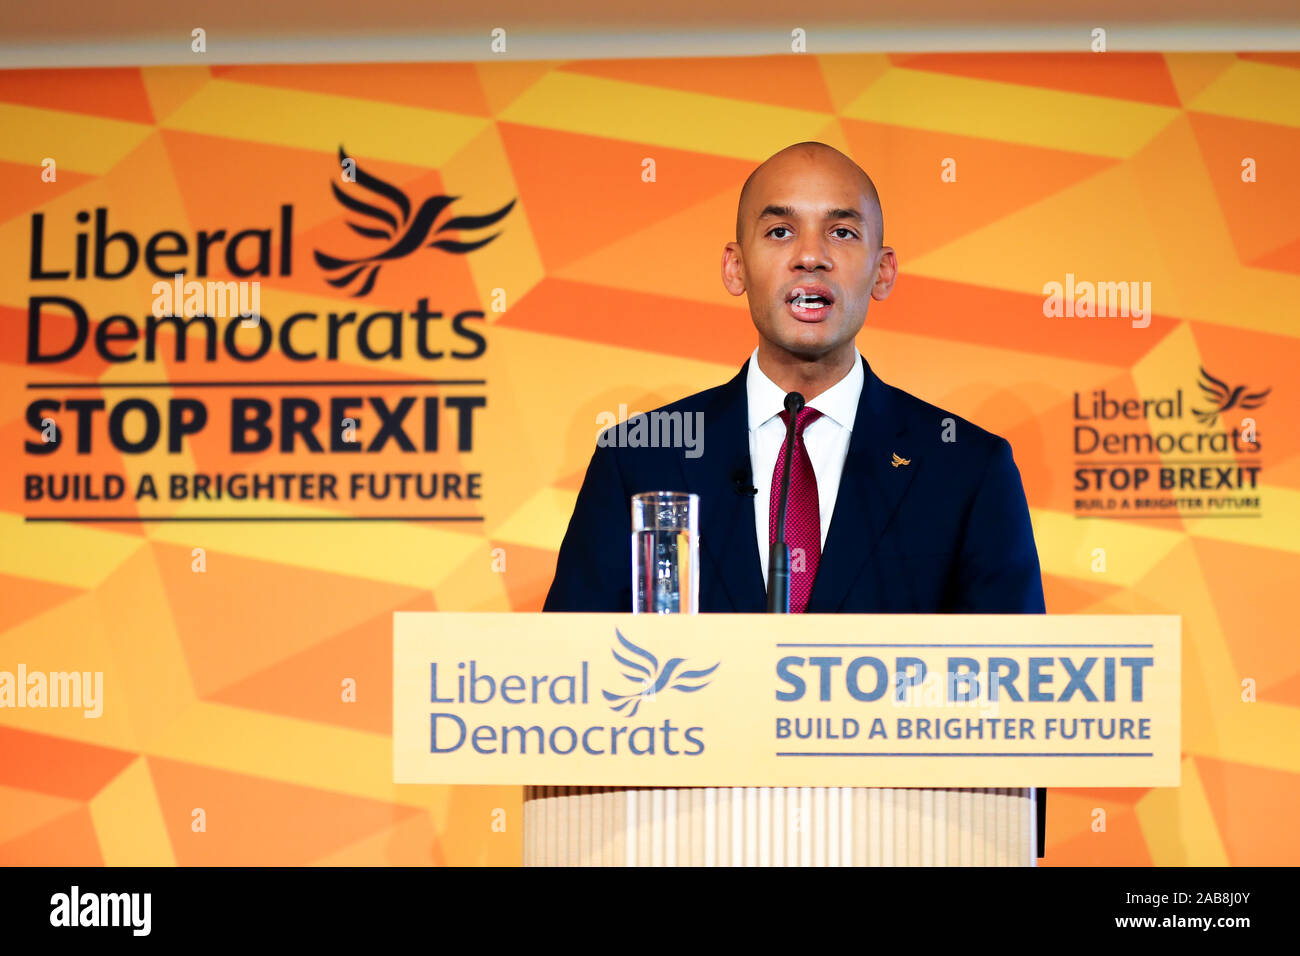 Liberal Democrat Foreign Affairs Spokesman and candidate of Cities of London & Westminster, Chuka Umunna speaks at Watford Football Club on Liberal Democrat foreign policy ahead of the NATO Leaders Conference. Stock Photo